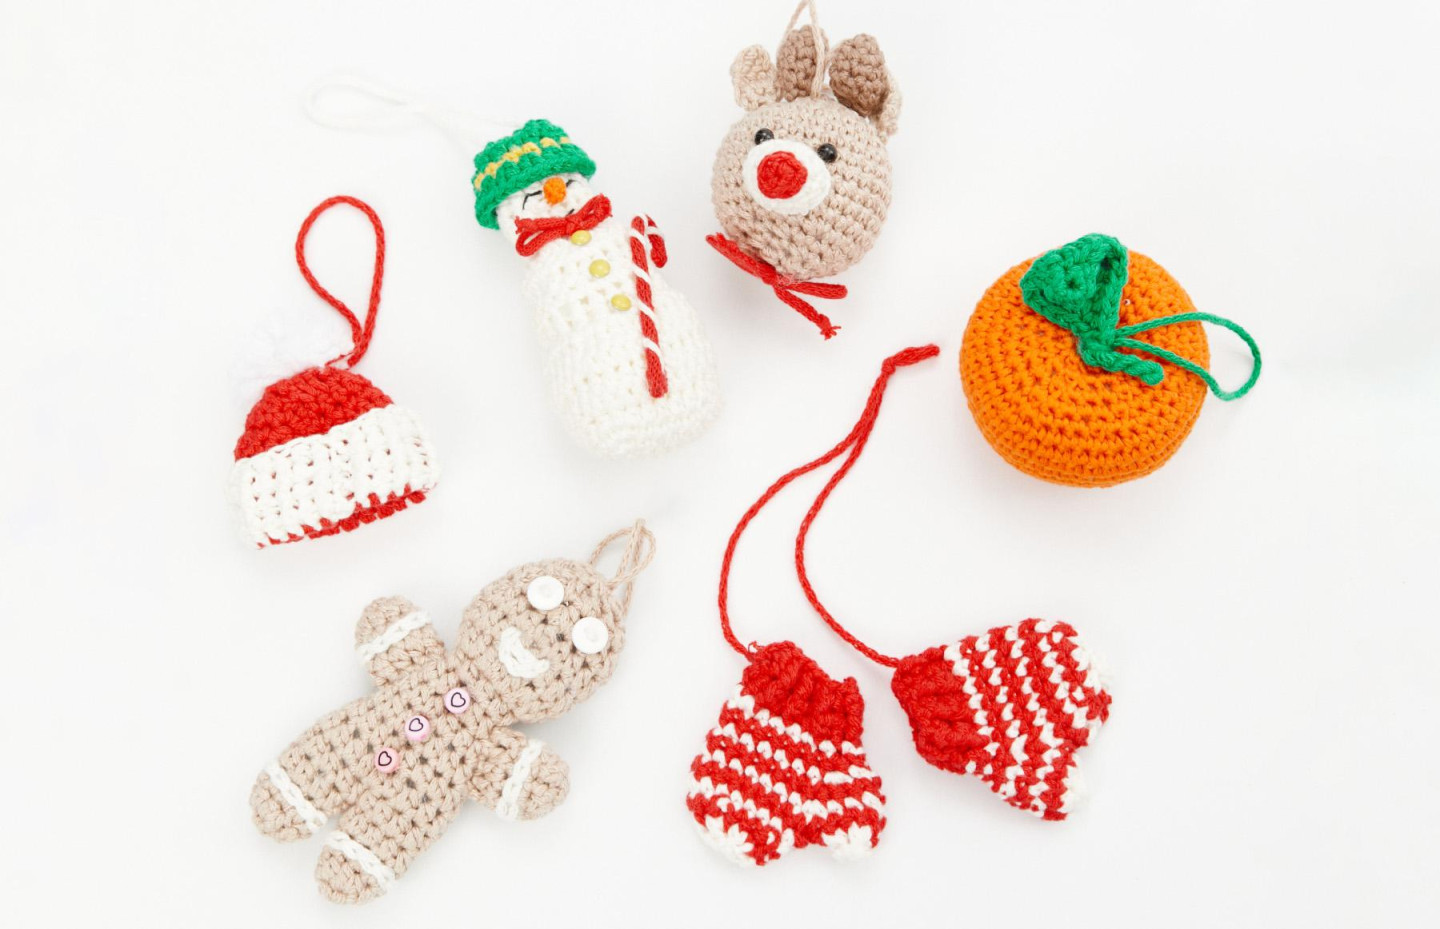 The 2Mood brand has released knitted Christmas tree decorations in favor of the Khabensky Foundation